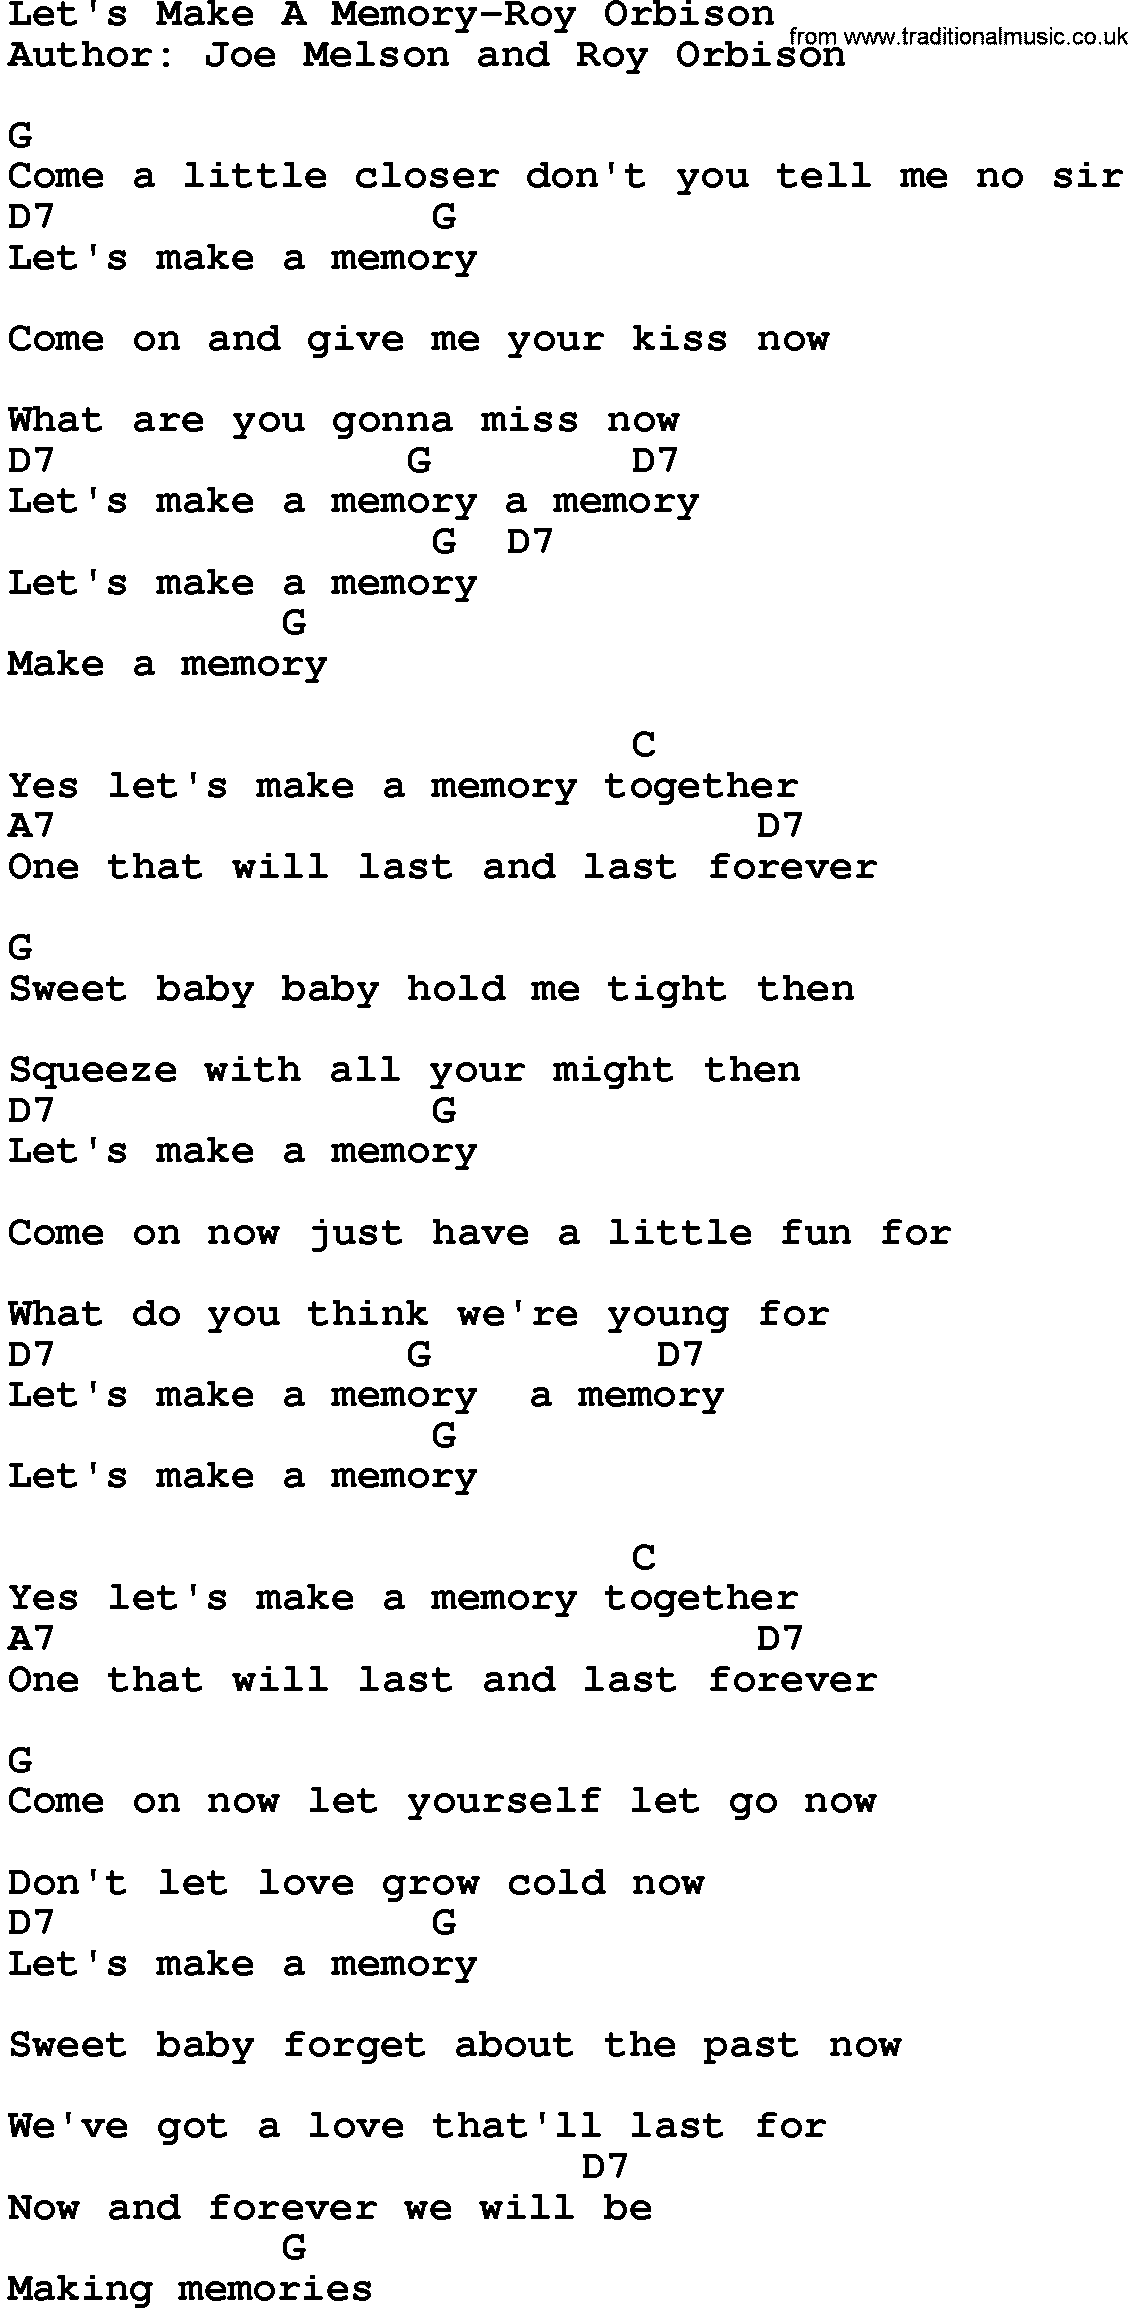 Country music song: Let's Make A Memory-Roy Orbison lyrics and chords